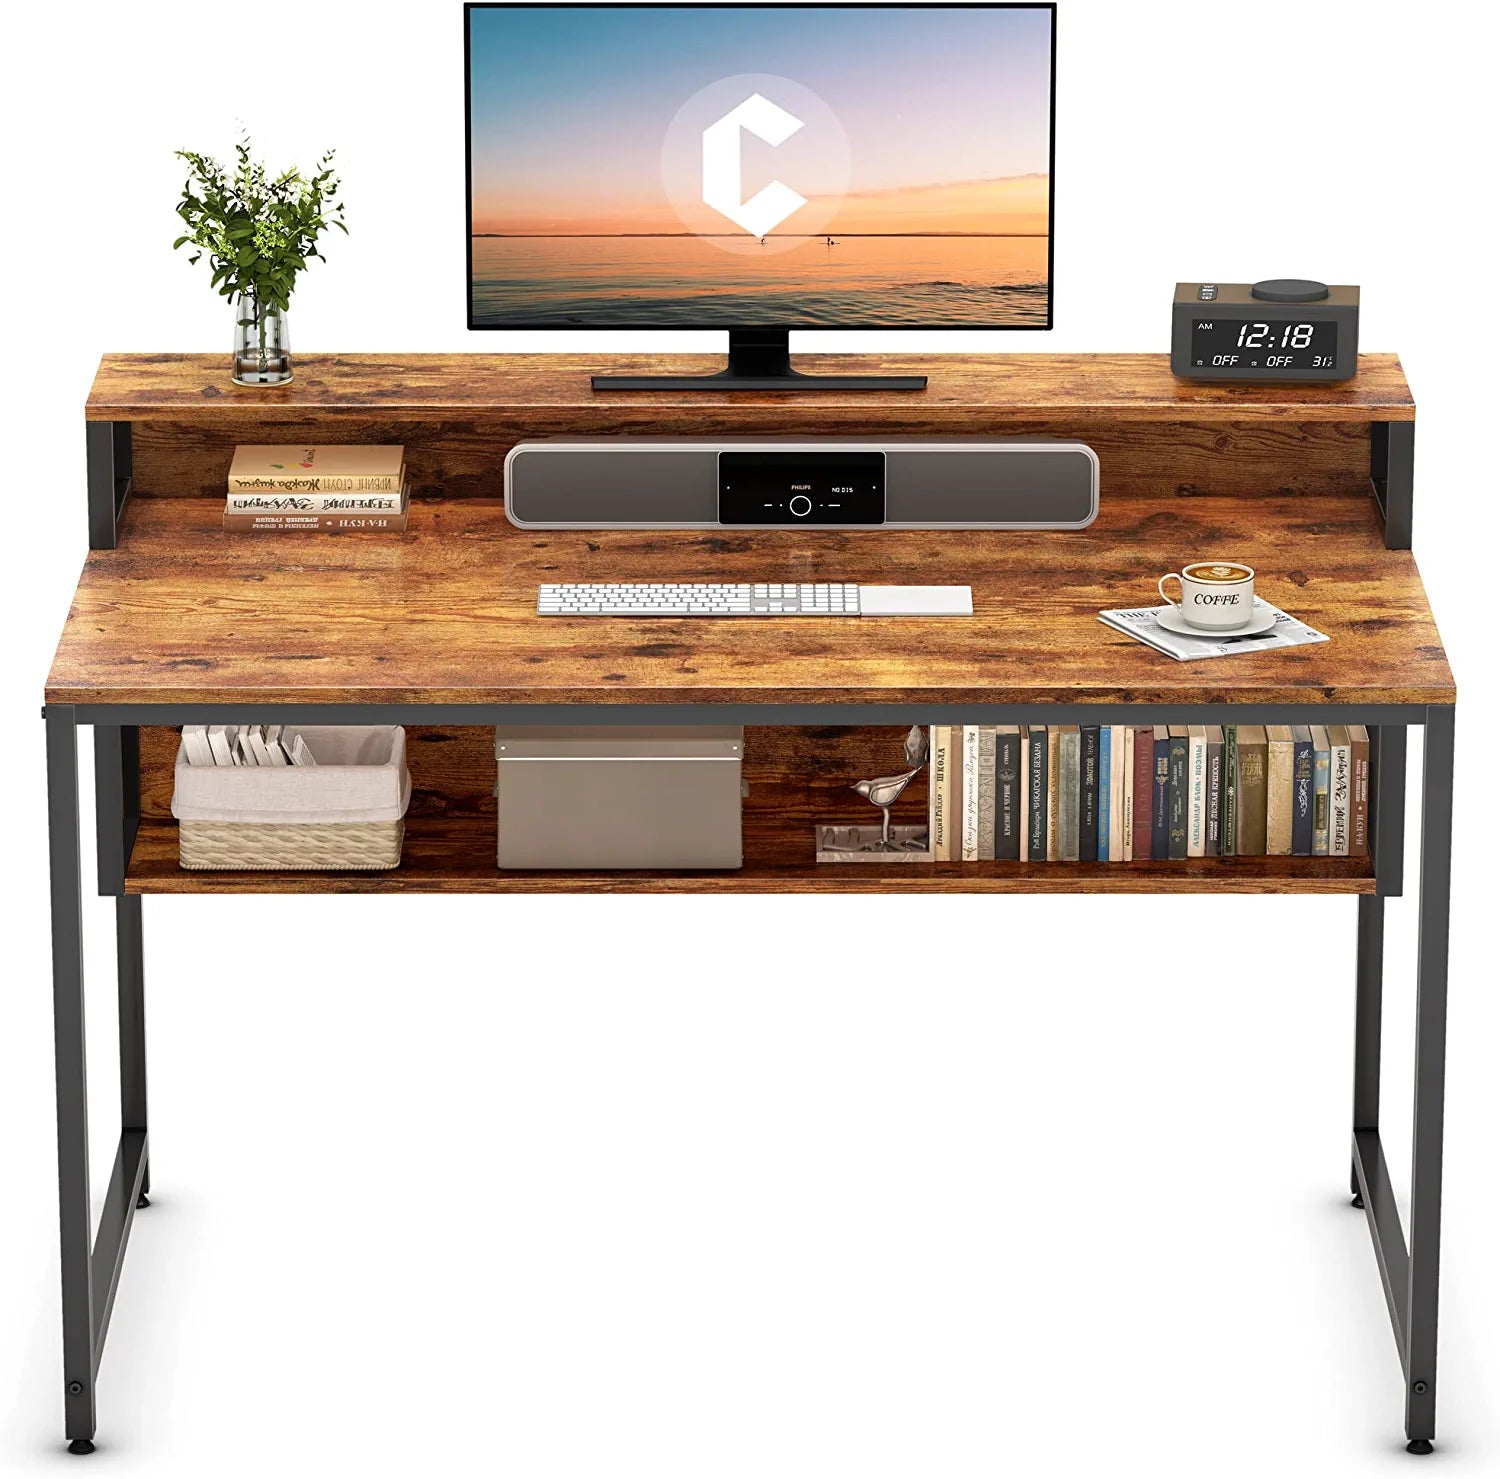 Computer Home Office Desk, 47" Small Desk Table with Storage Shelf and Bookshelf, Study Writing Table Modern Simple Style Space Saving Design, Rustic